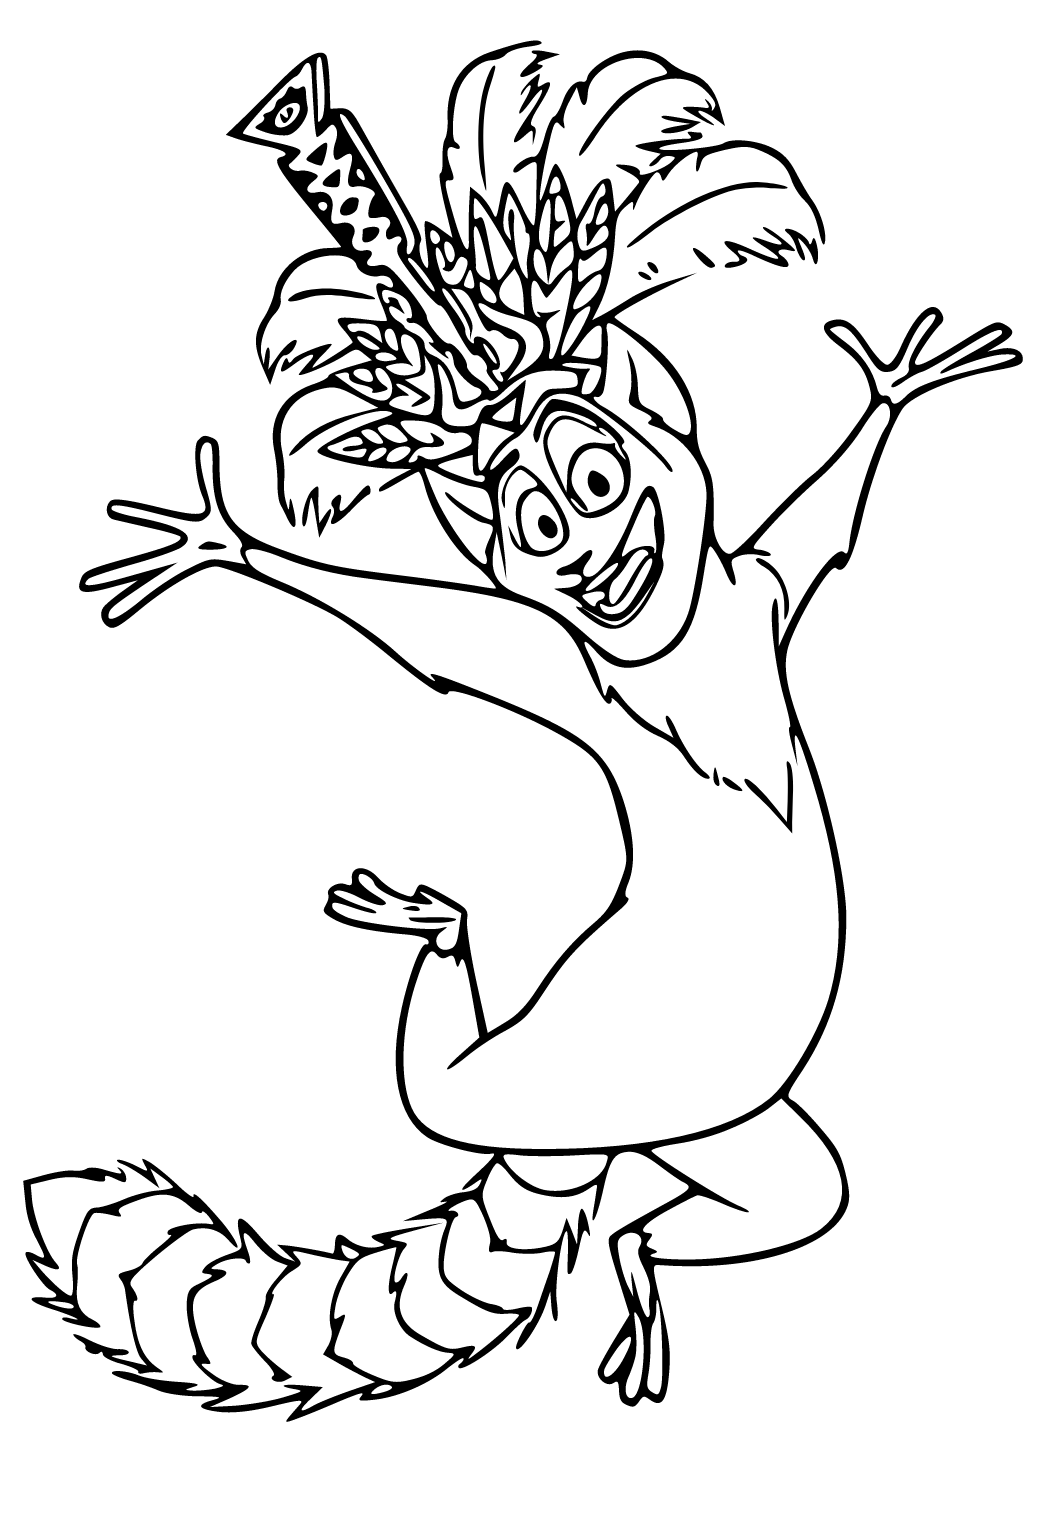 Free Printable Madagascar King Coloring Page for Adults and Kids ...